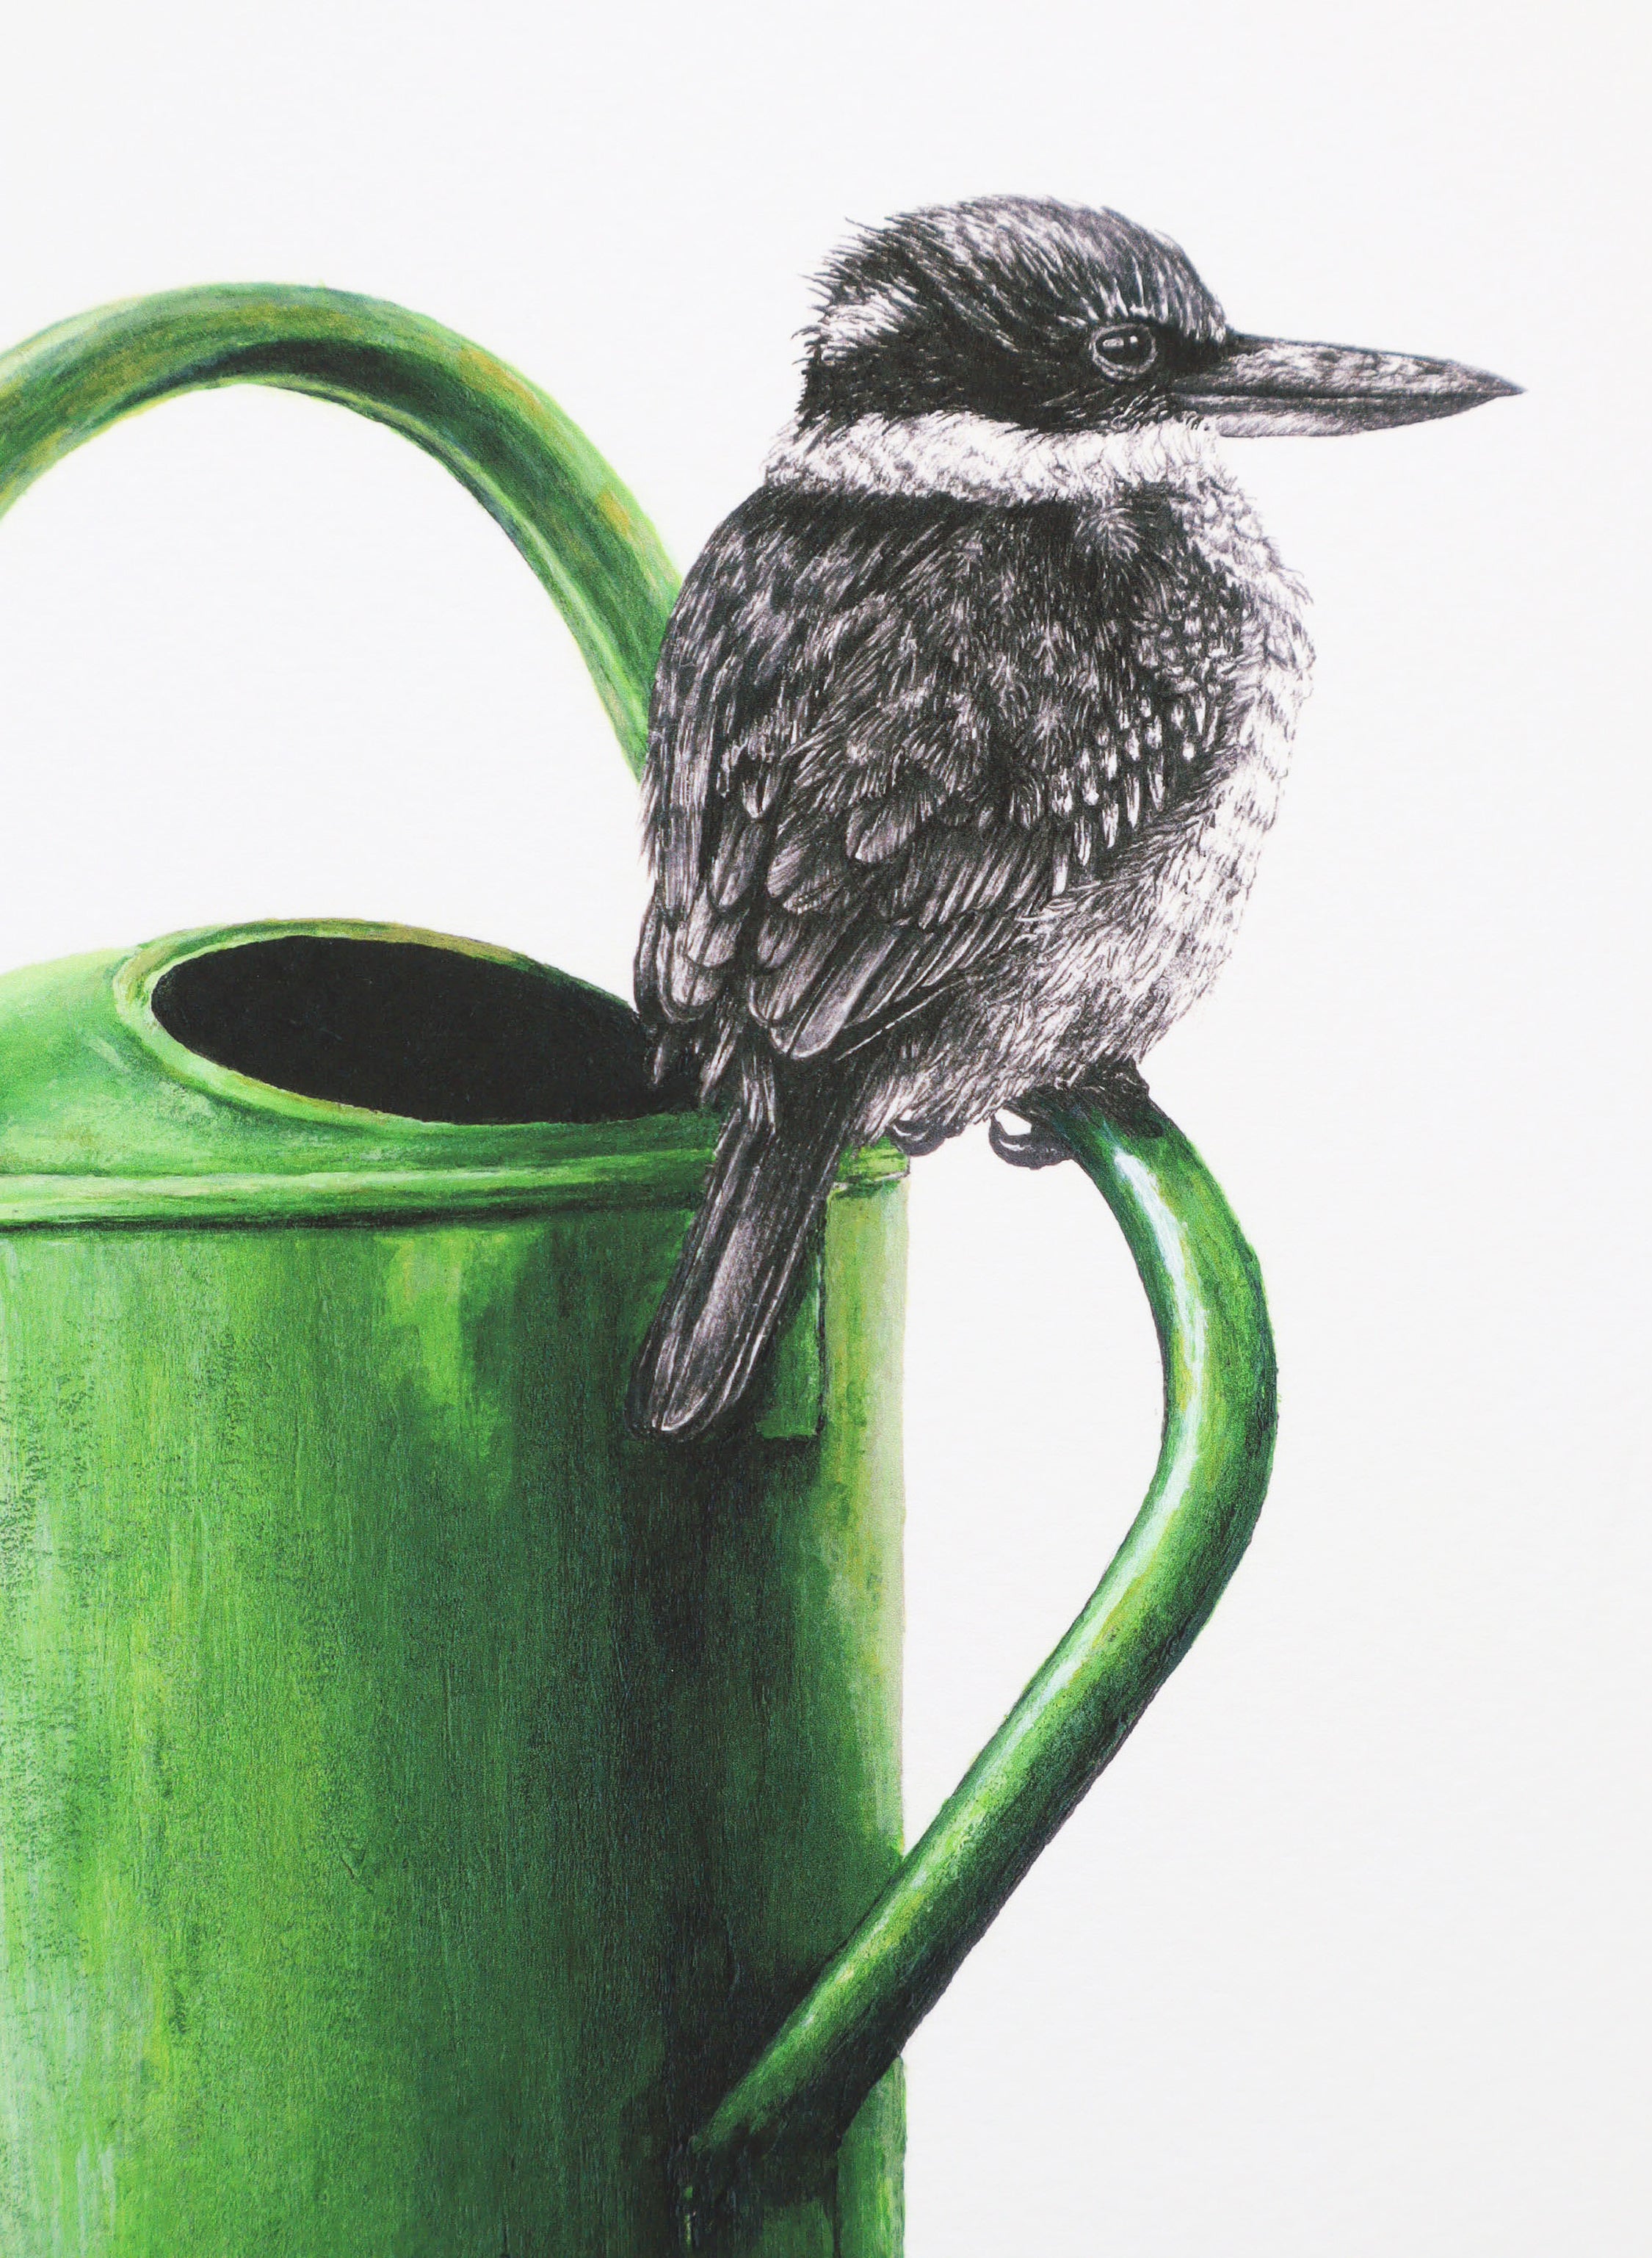 Kingfisher on Watering Can - Giclée Print